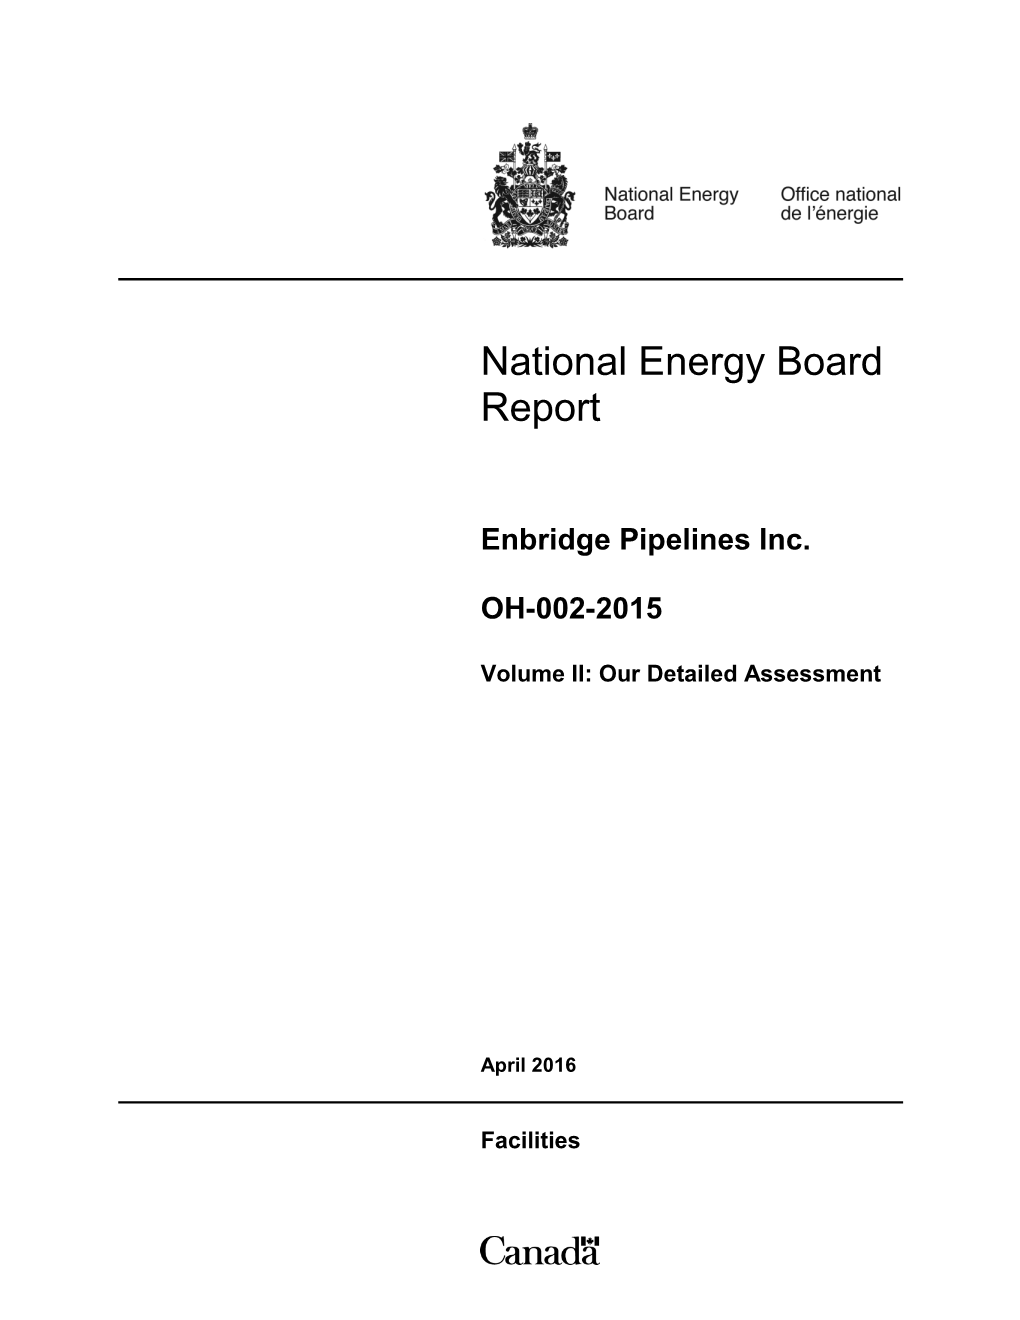 National Energy Board Report